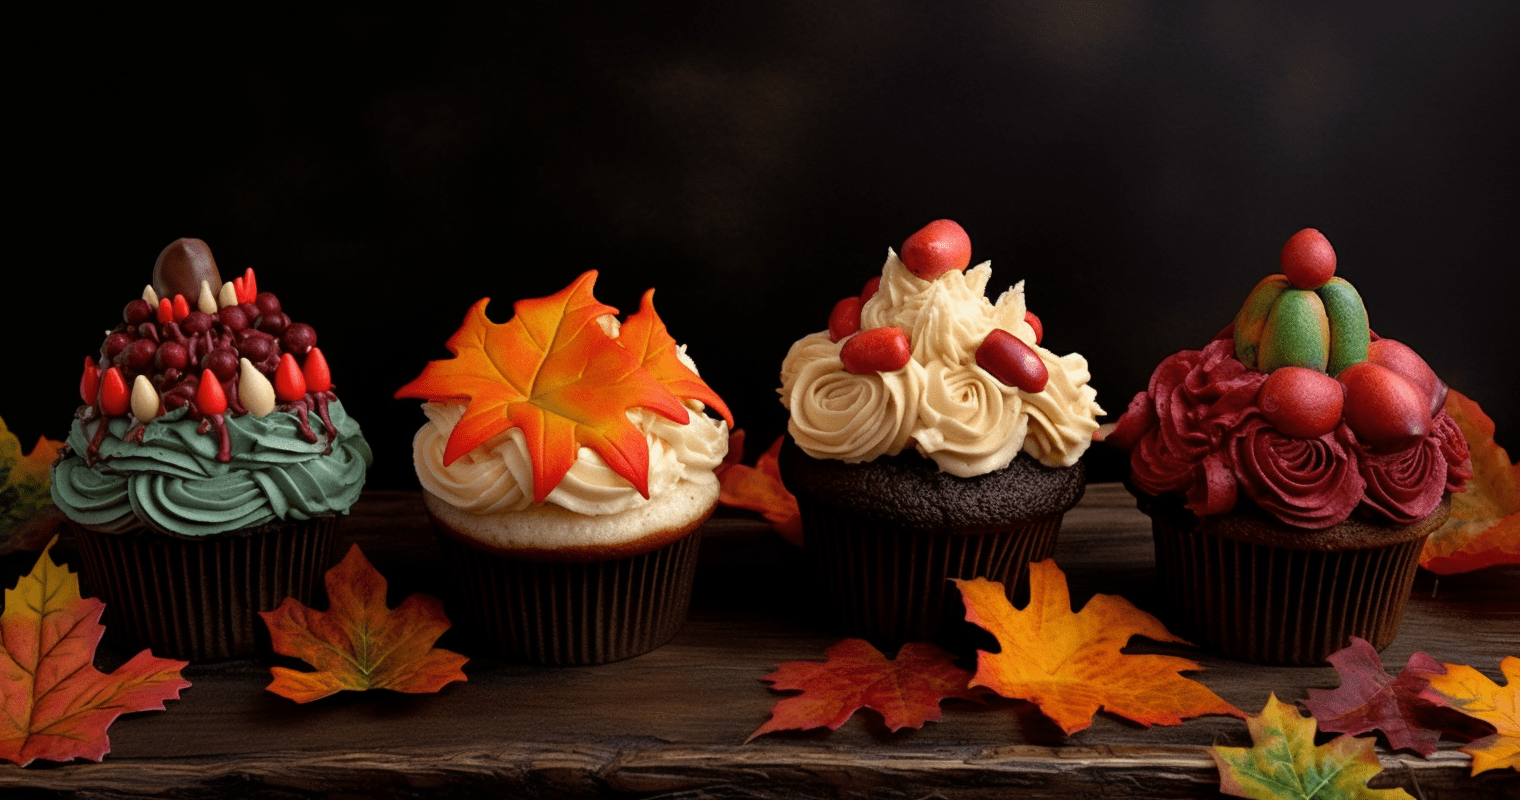 Fall Inspired Cupcakes: A Delightful Autumn Treat